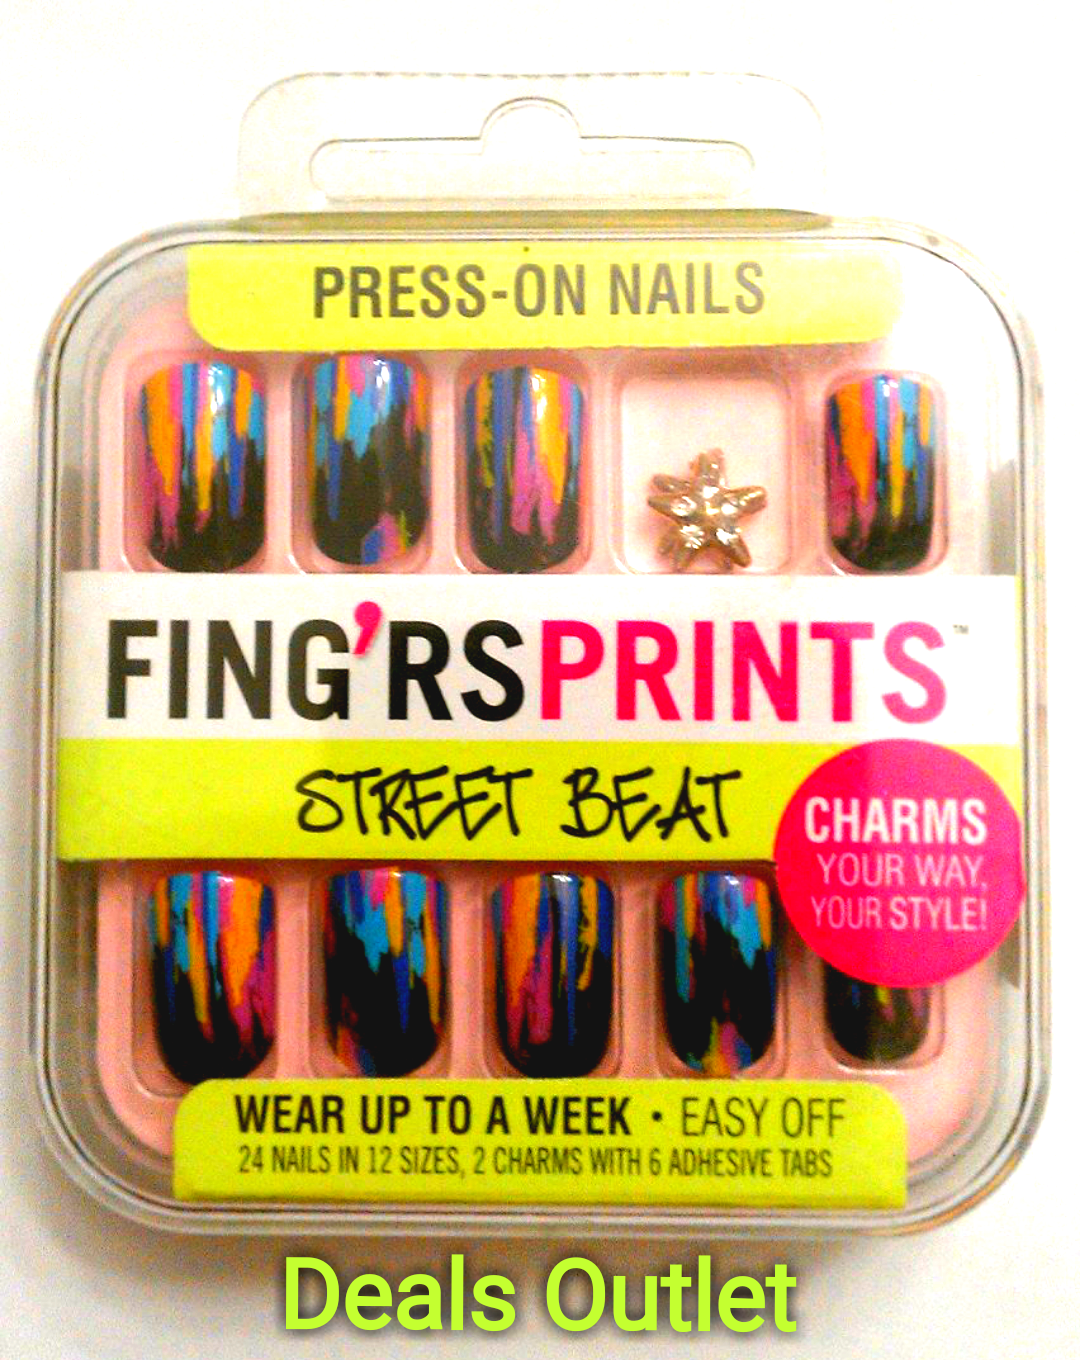 Fing'rs Prints Street beat (24) Nails